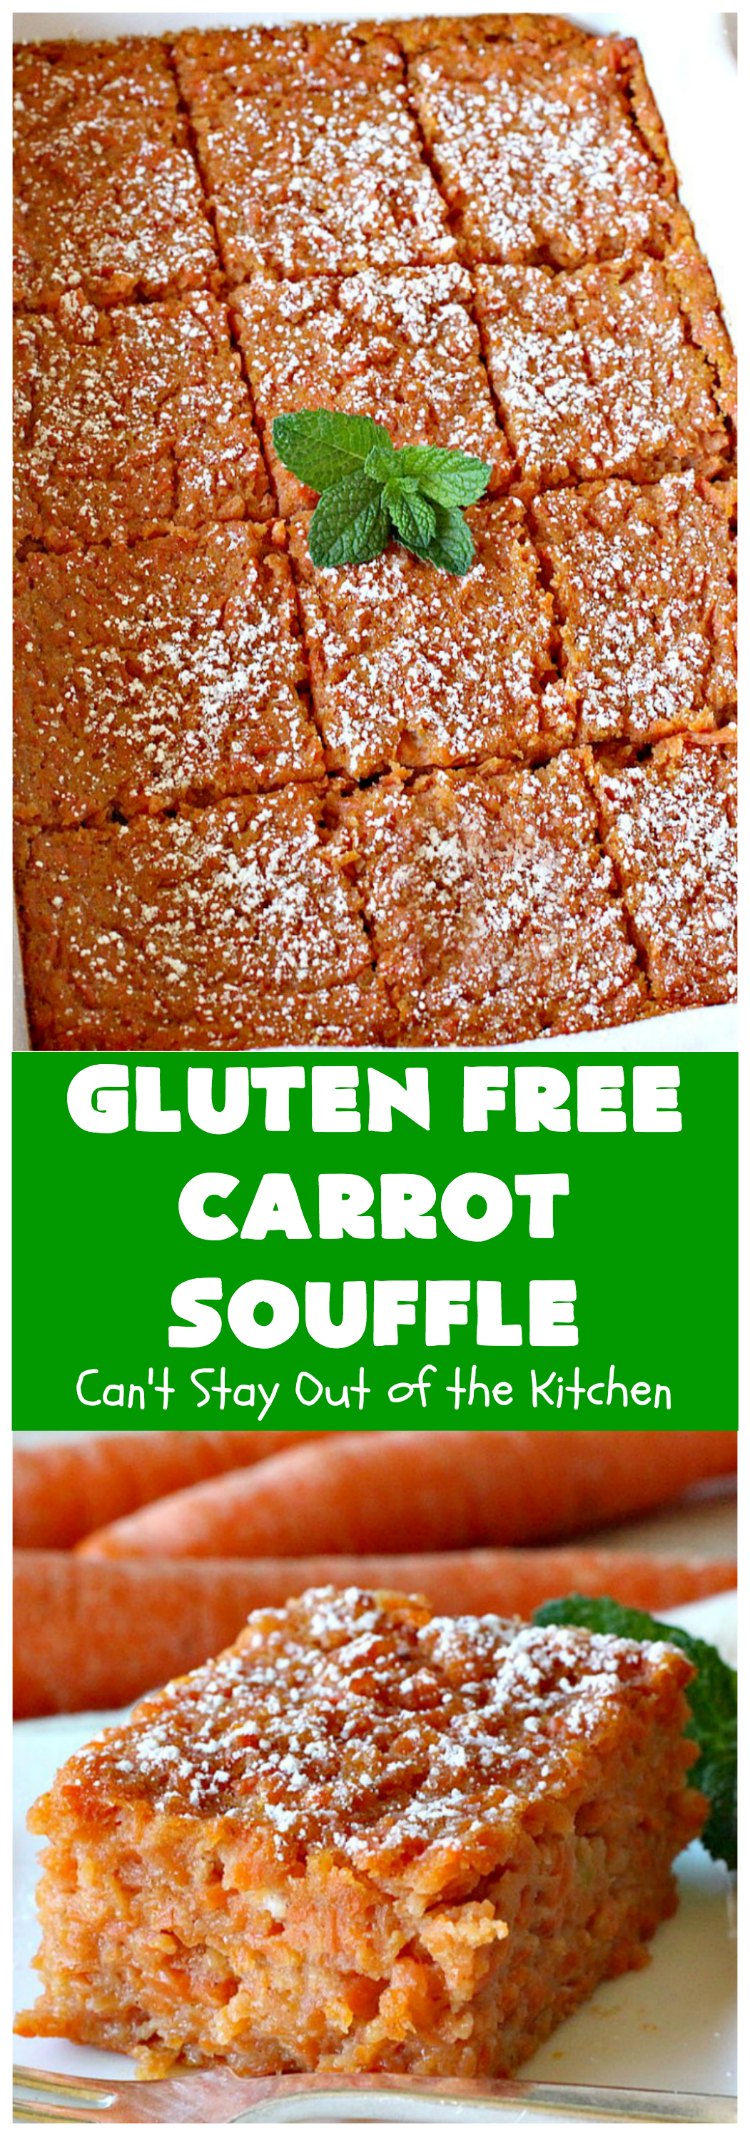 Gluten Free Carrot Souffle | Can't Stay Out of the Kitchen